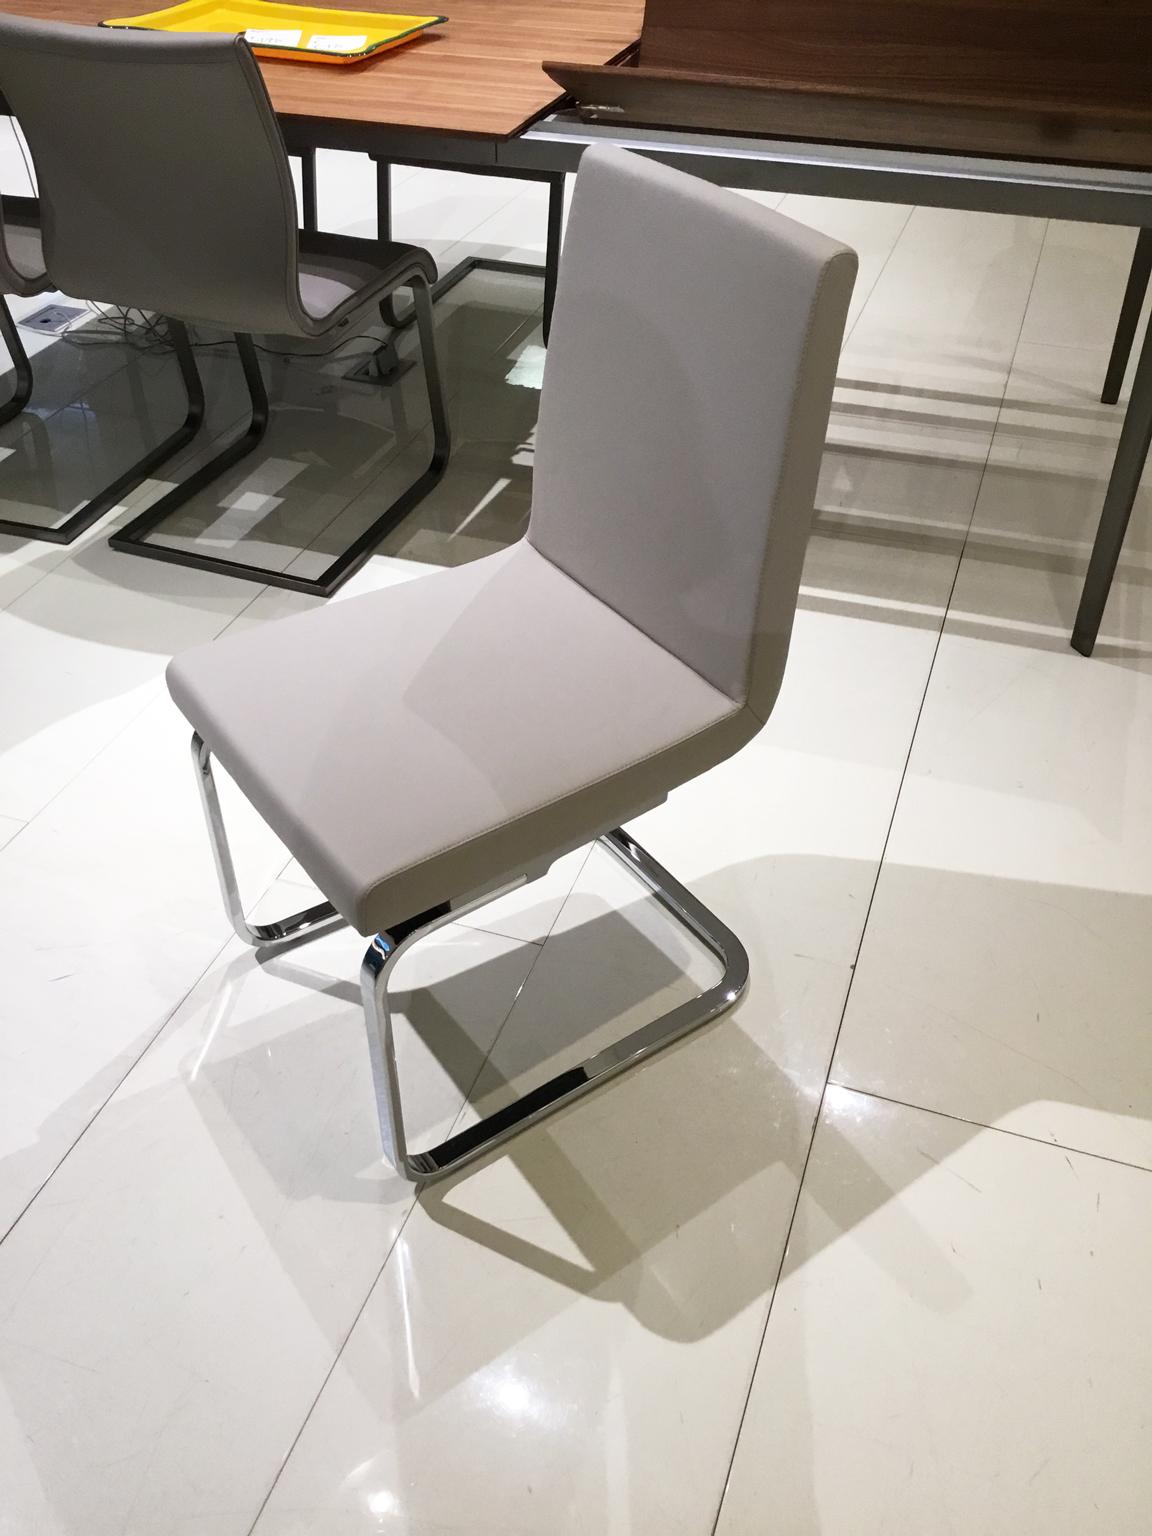 Set of four grey beige leather dining chairs with a cantilevered rectangular tubed base in polished chrome.

Showroom display chairs, two of which were manufactured in 2017 and the other two manufactured in 2021. They are made up in the same